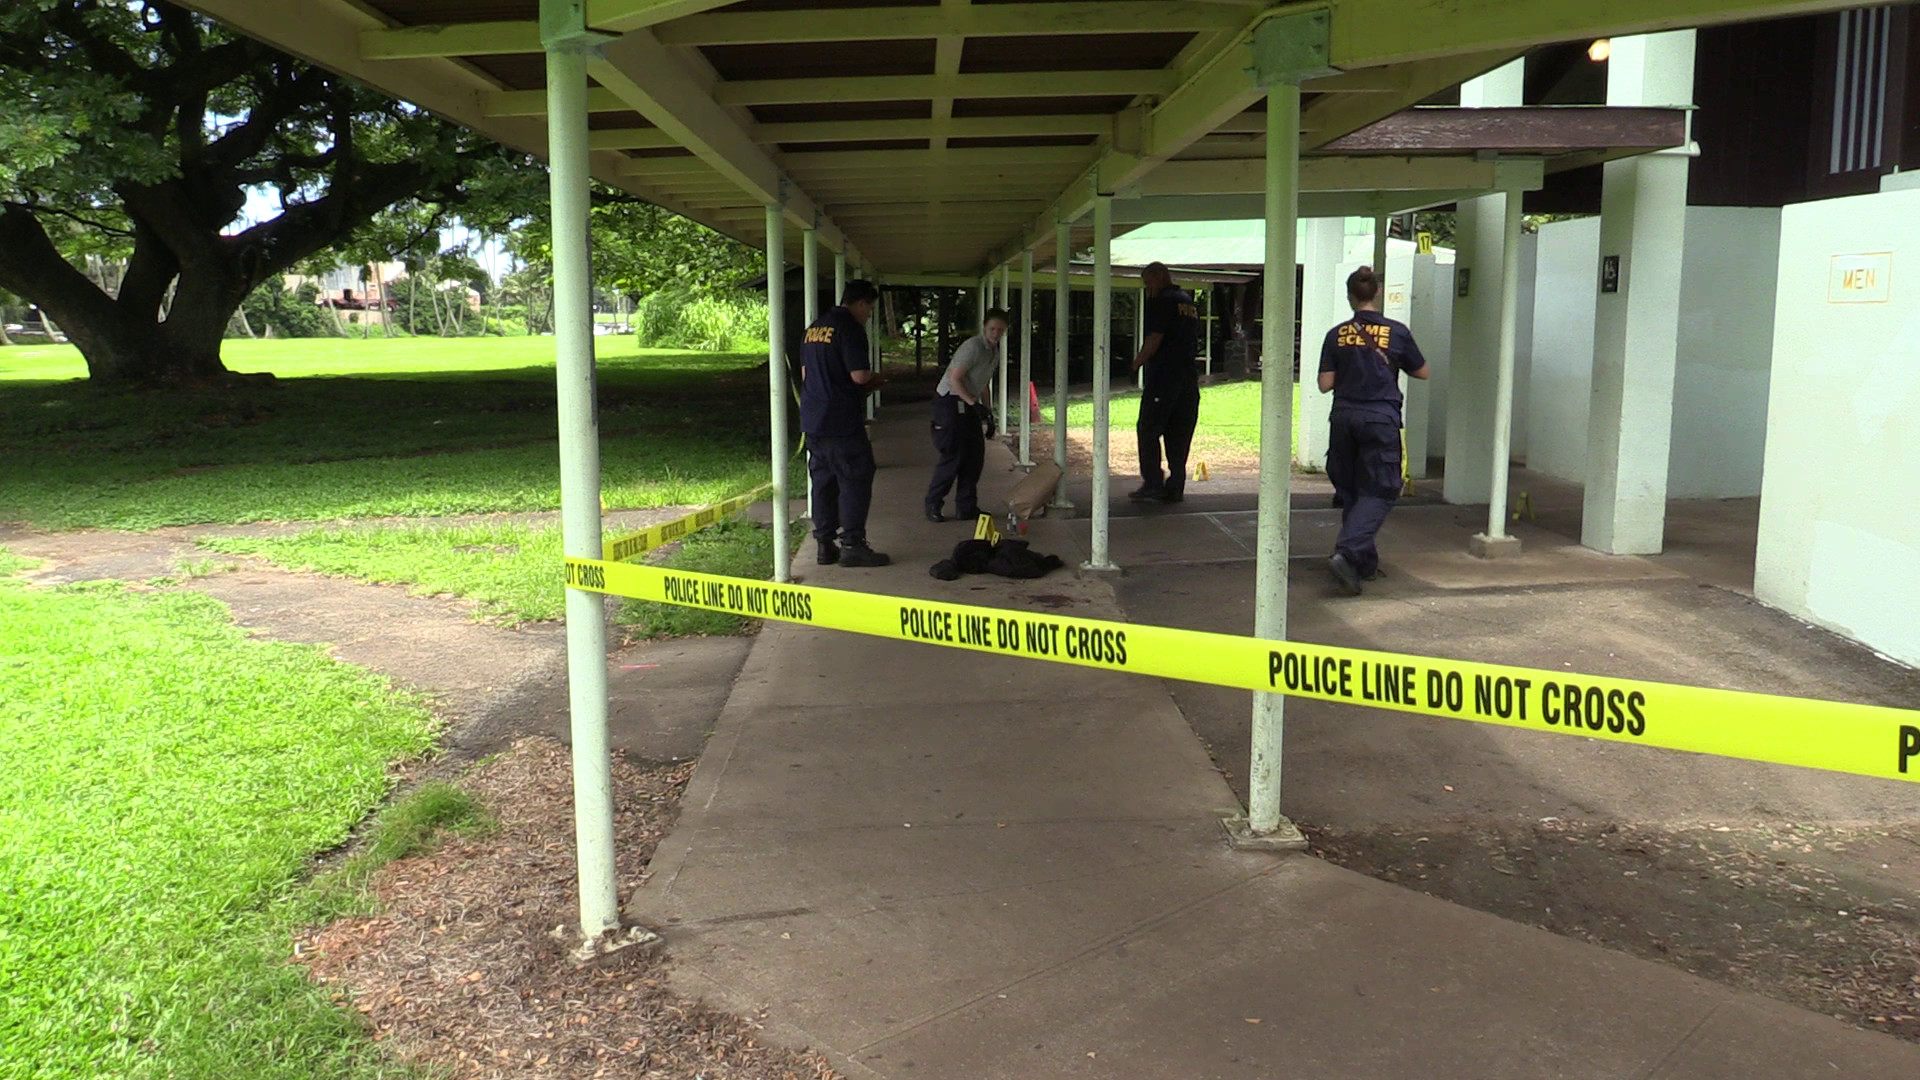 Hawaii Co. Police detectives and technicians work the crime scene at Wailoa State Park on Monday. Photography by Daryl W. Lee.